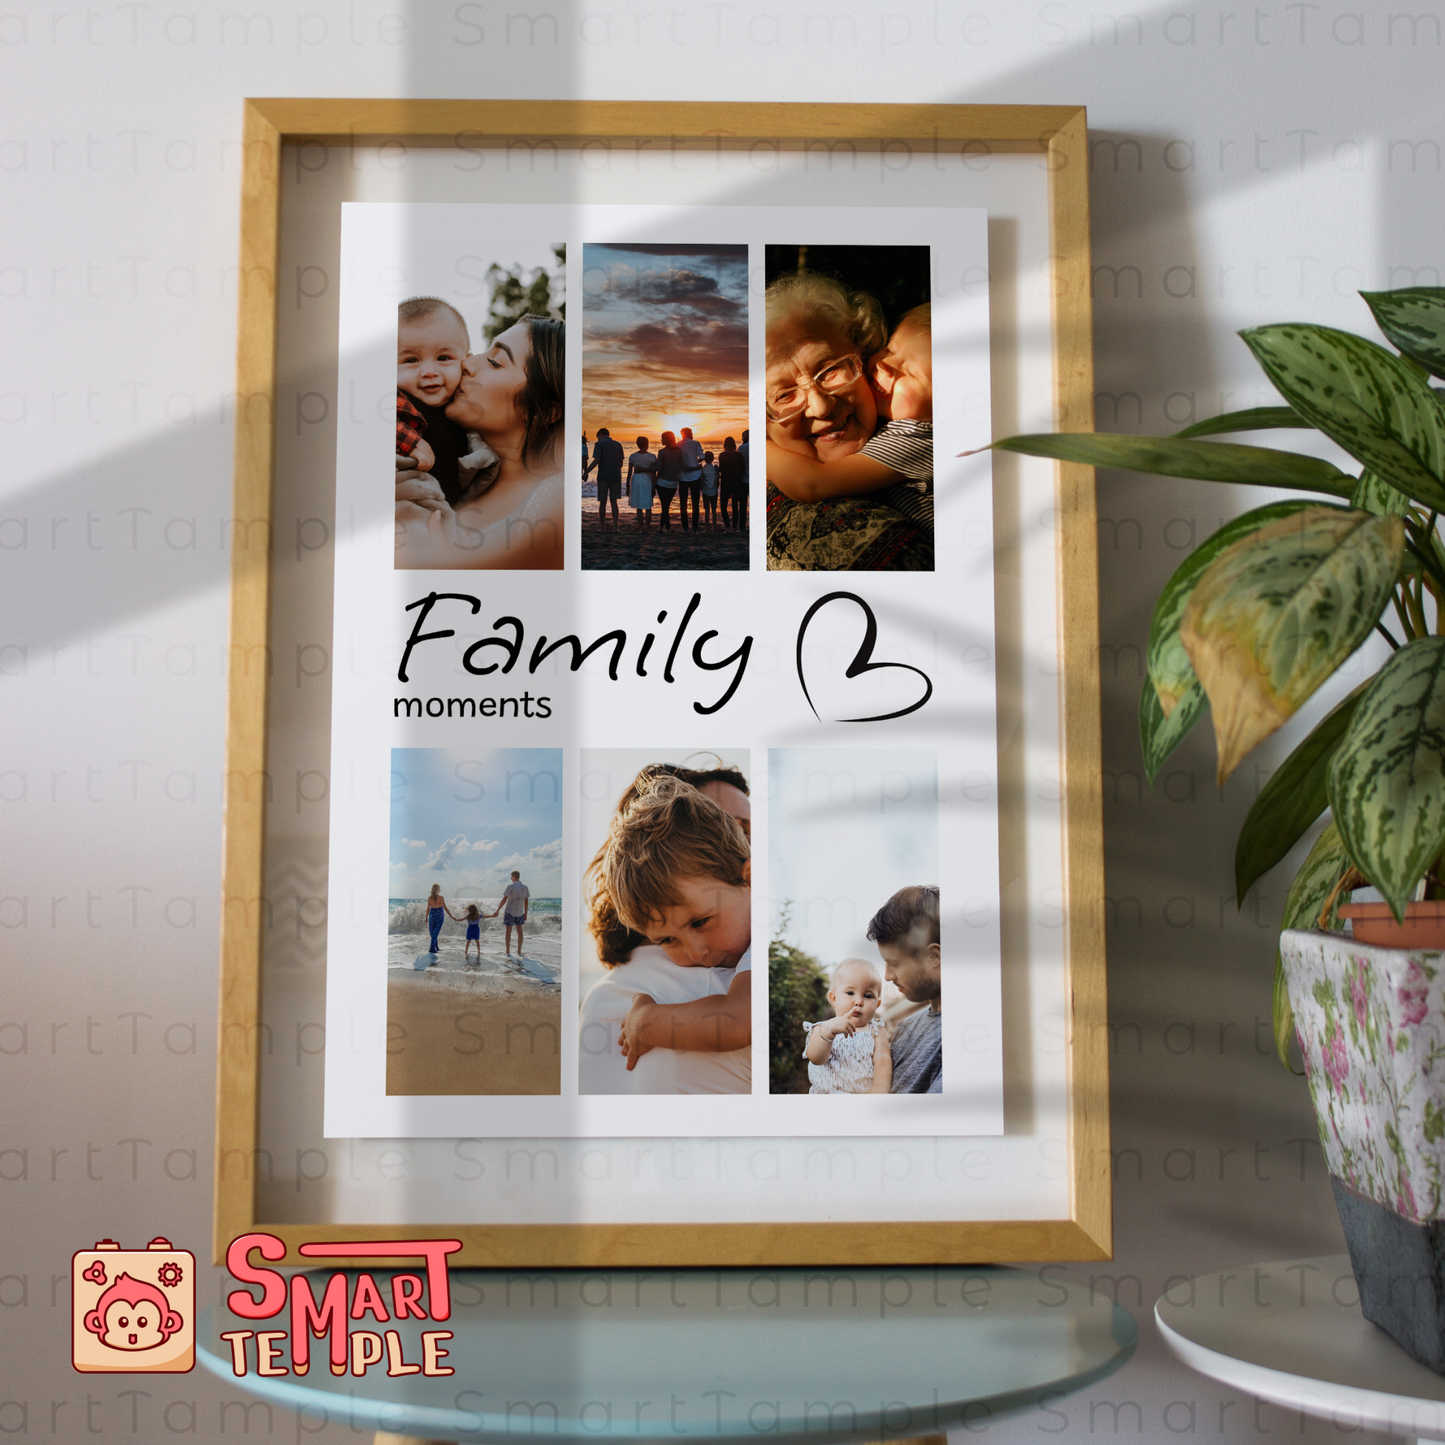 Personalised Framed Photo Collage, Framed Photo Print, Family Portrait, Family Photo, Custom Gift, Gift Ideas for Him or Her